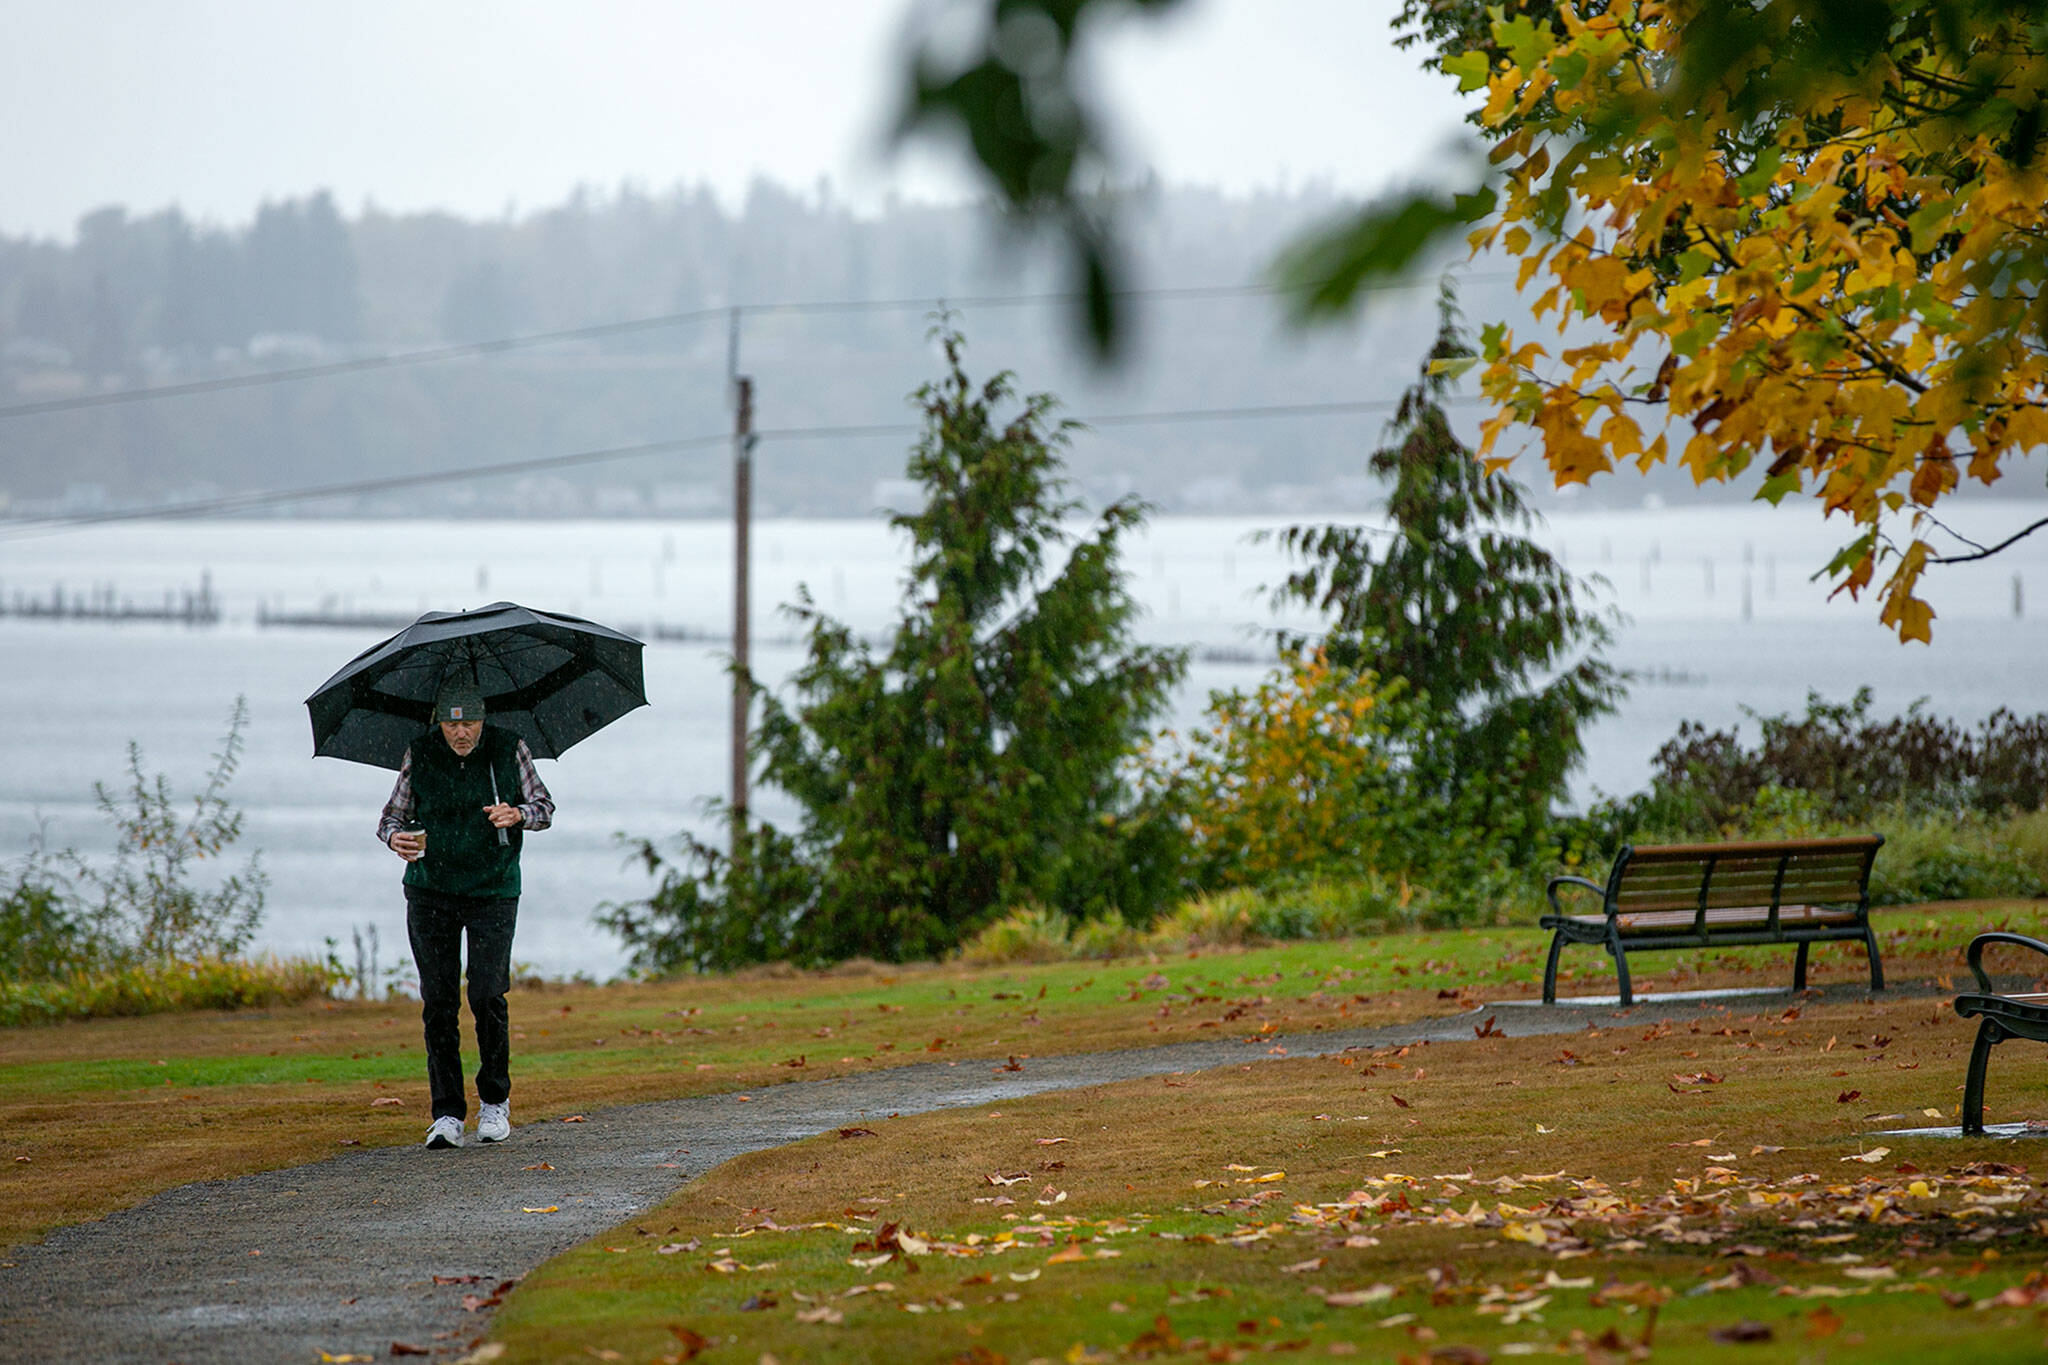 Bill Pearson, 78, takes a walk through the rain at Hibulb Lookout — one of his favorite spots — while nursing a latte from Bargreen’s on Friday, in Everett. A lifelong Washingtonian, save a few years in the Army, Pearson said he feels more comfortable getting outside during the milder months. “This is my time of year,” he said, gesturing to the clouds and rain. (Ryan Berry / The Herald)